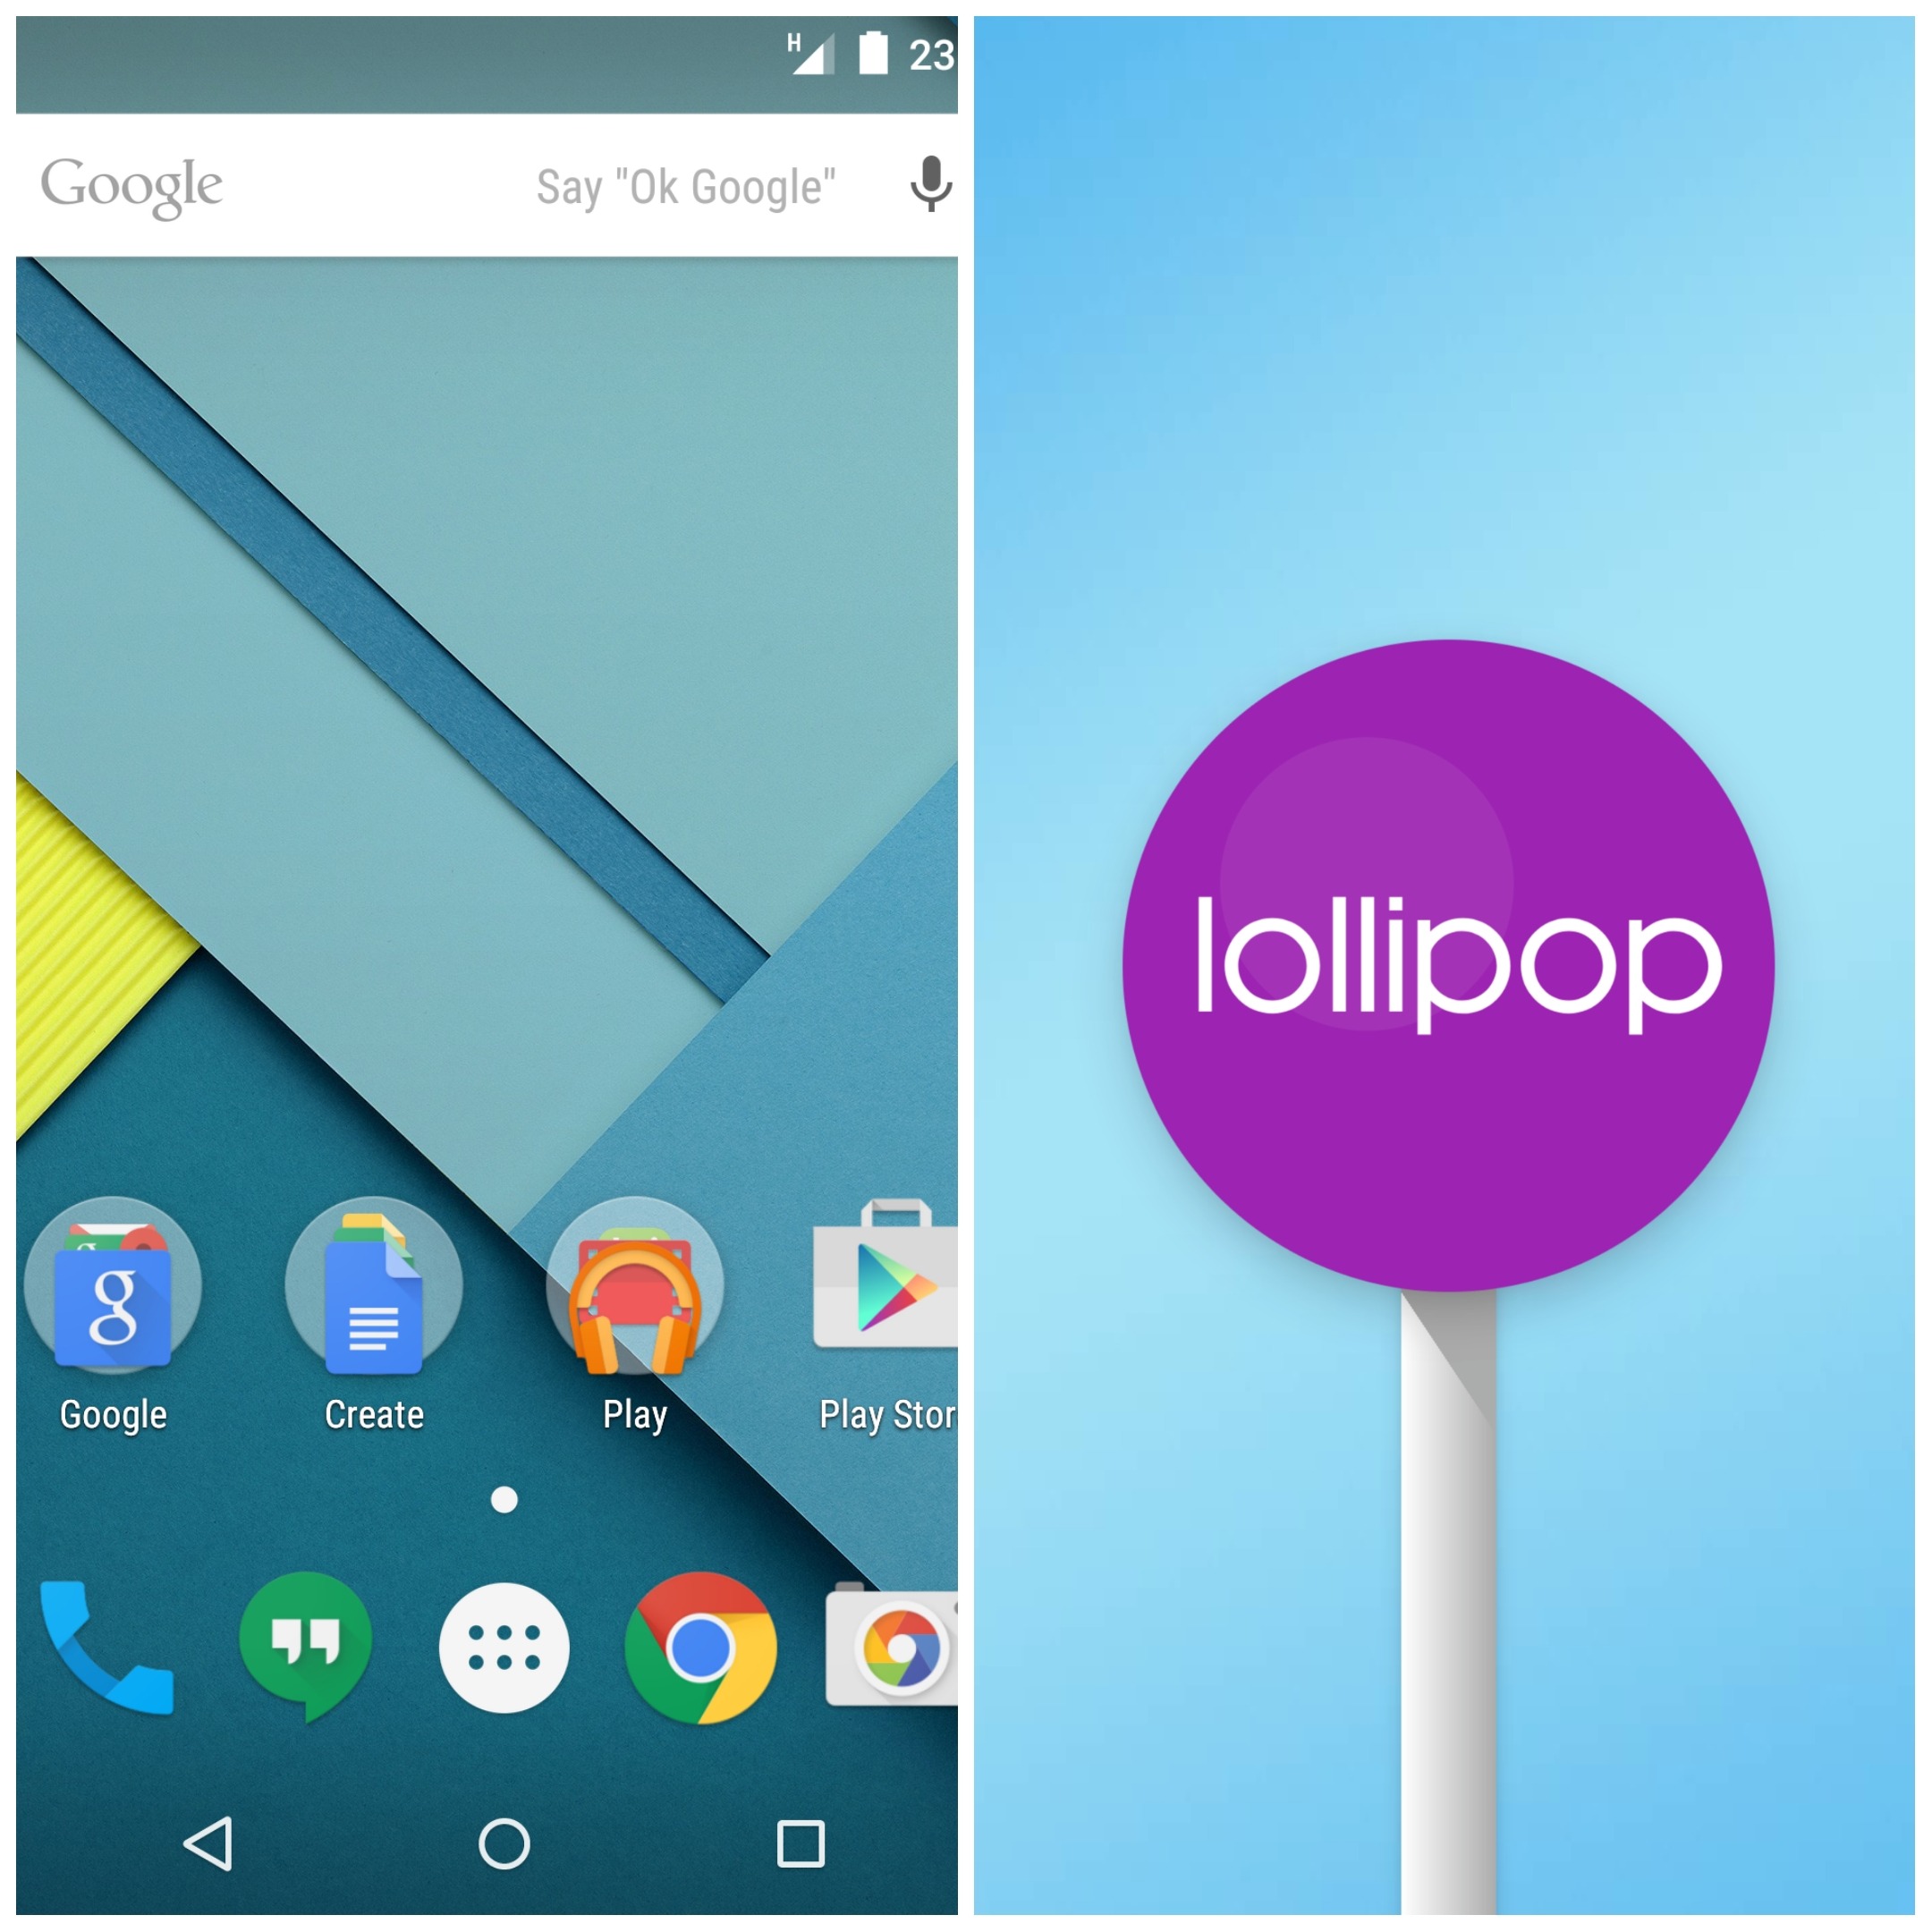 The history of Android lollipop